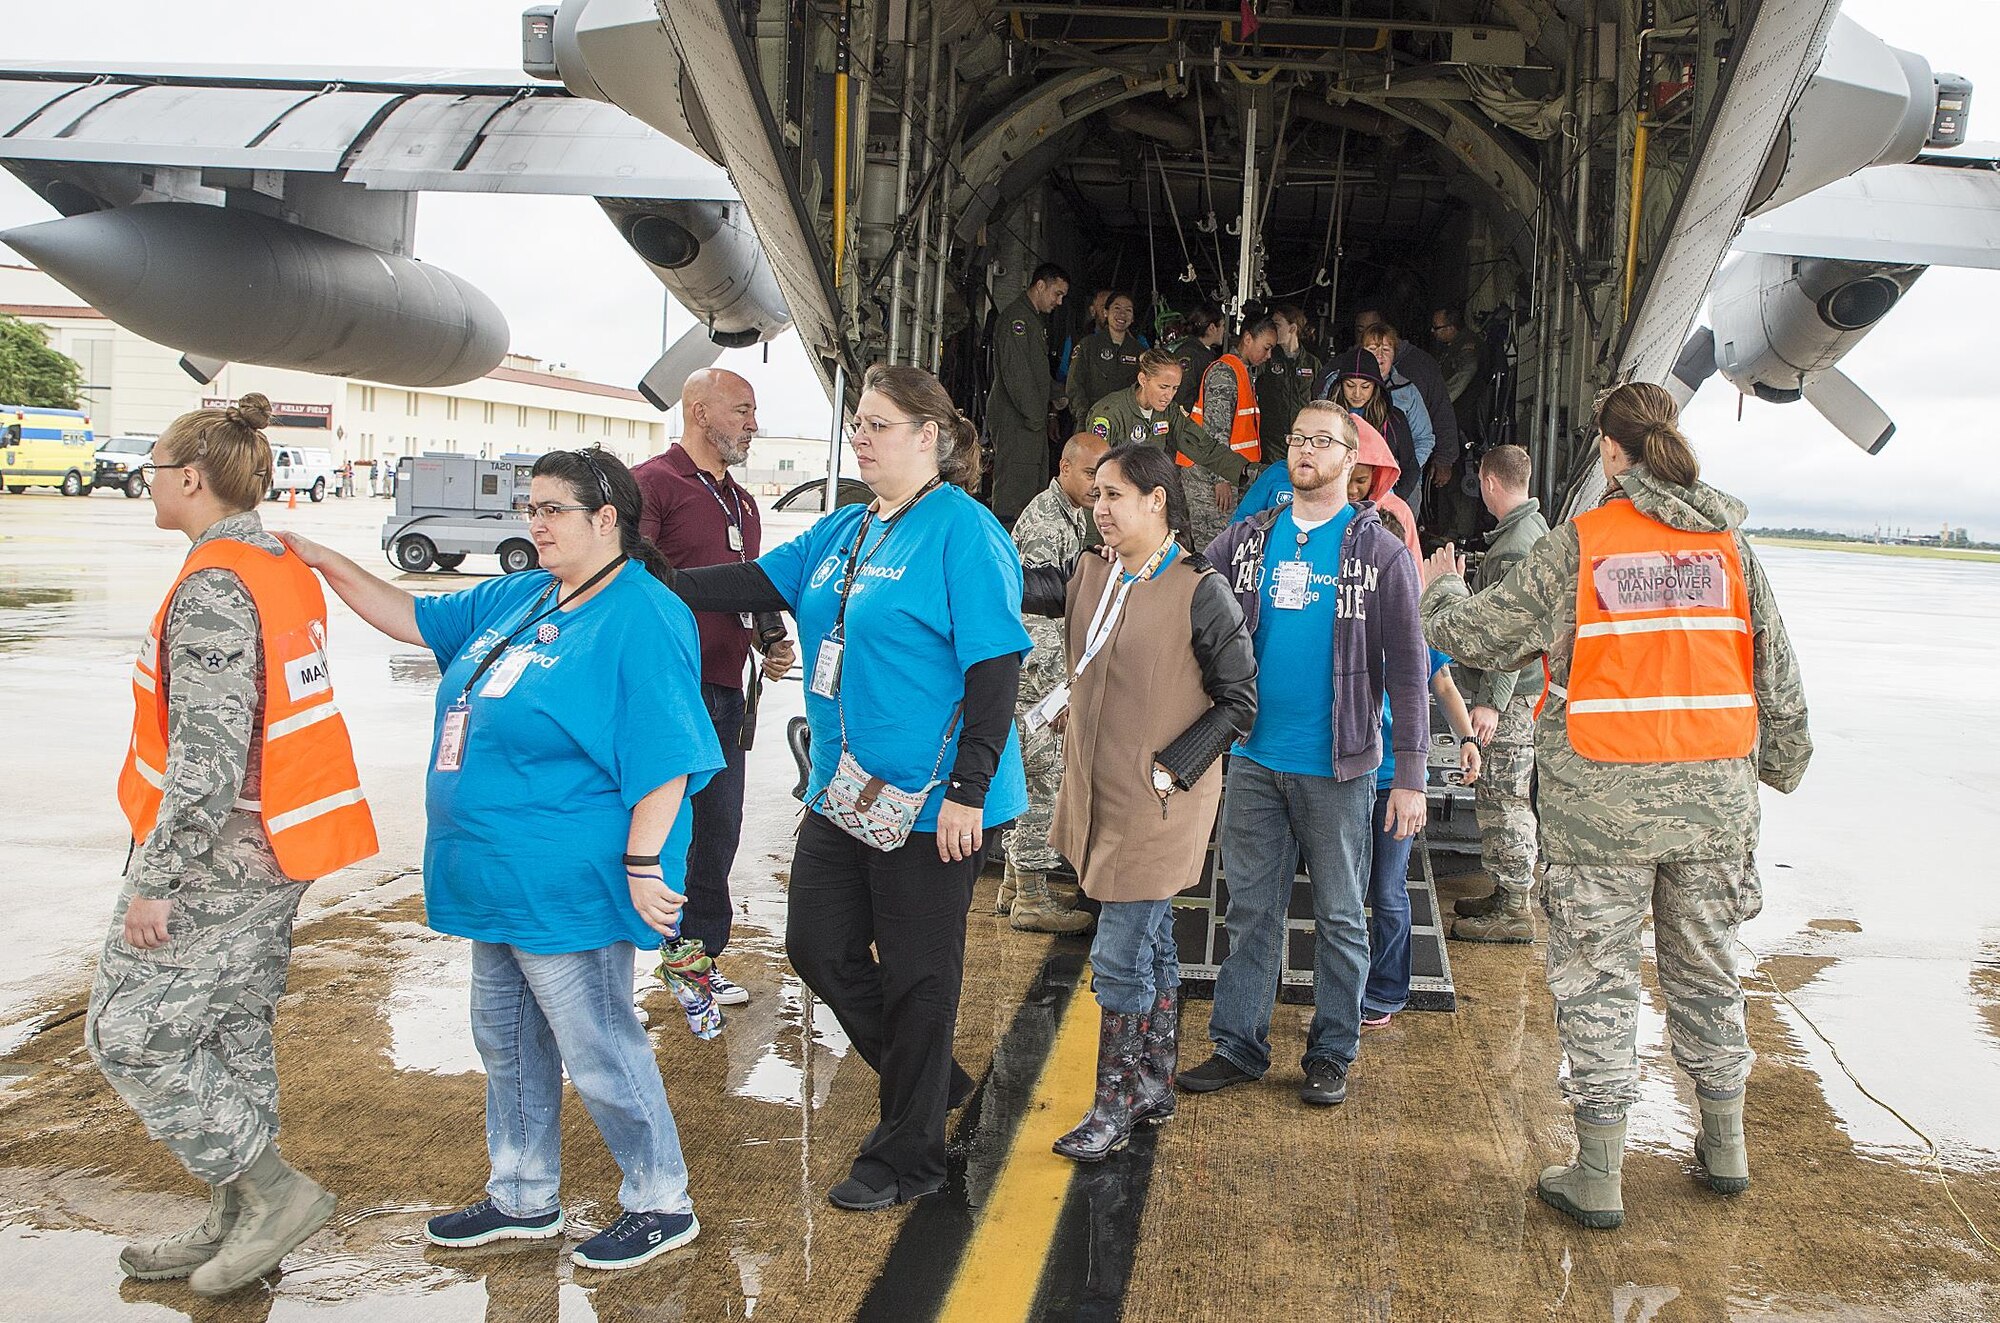 Patients are escorted off of a C-130 Hercules aircraft by Airmen from the 433rd Aeromedical Evacuation Squadron during a natural disaster exercise Nov. 9, 2016 at Joint Base San Antonio-Lackland, Texas.The exercise allowed the South Texas Regional Advisory Council to meet its annual requirement to test its ability to evacuate patients with regional Emergency Medical Service departments. (U.S. Air Force photo by Benjamin Faske)